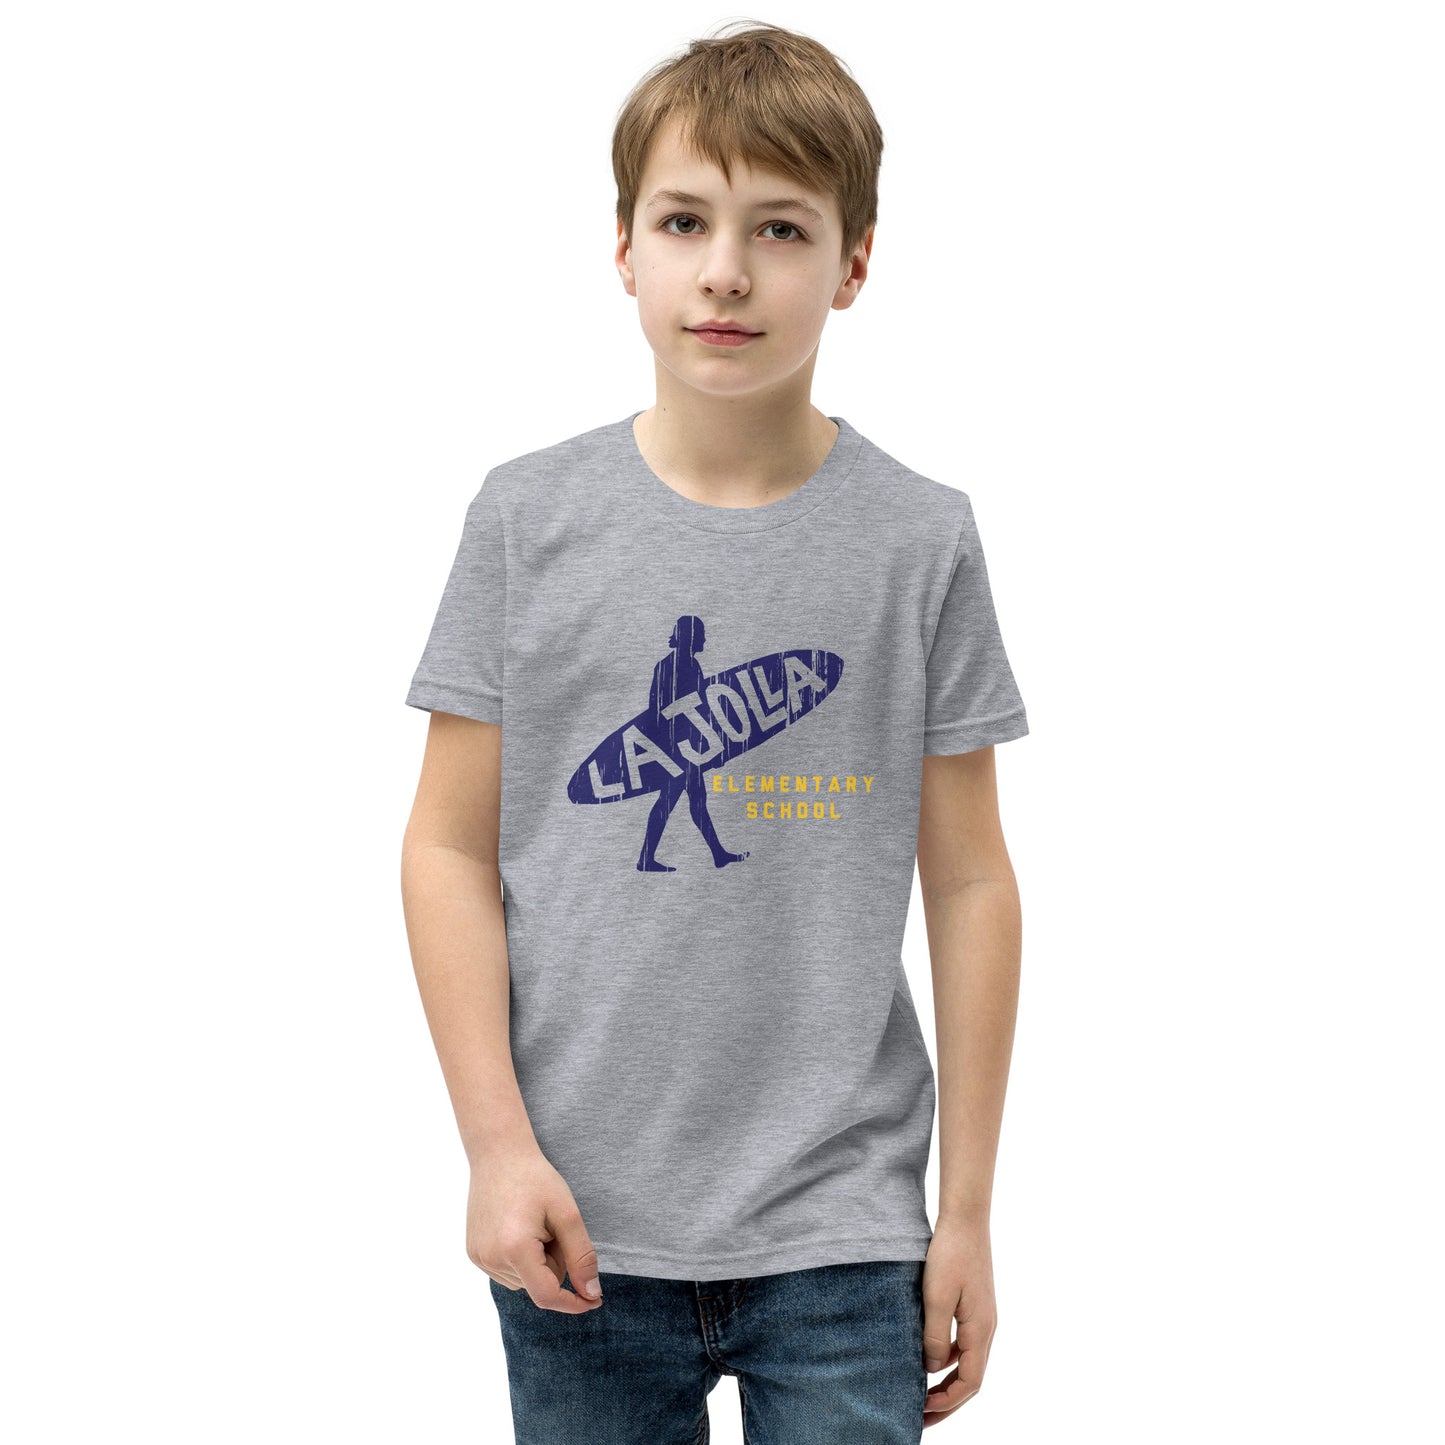 Surfer Collection: Youth Short Sleeve T-Shirt